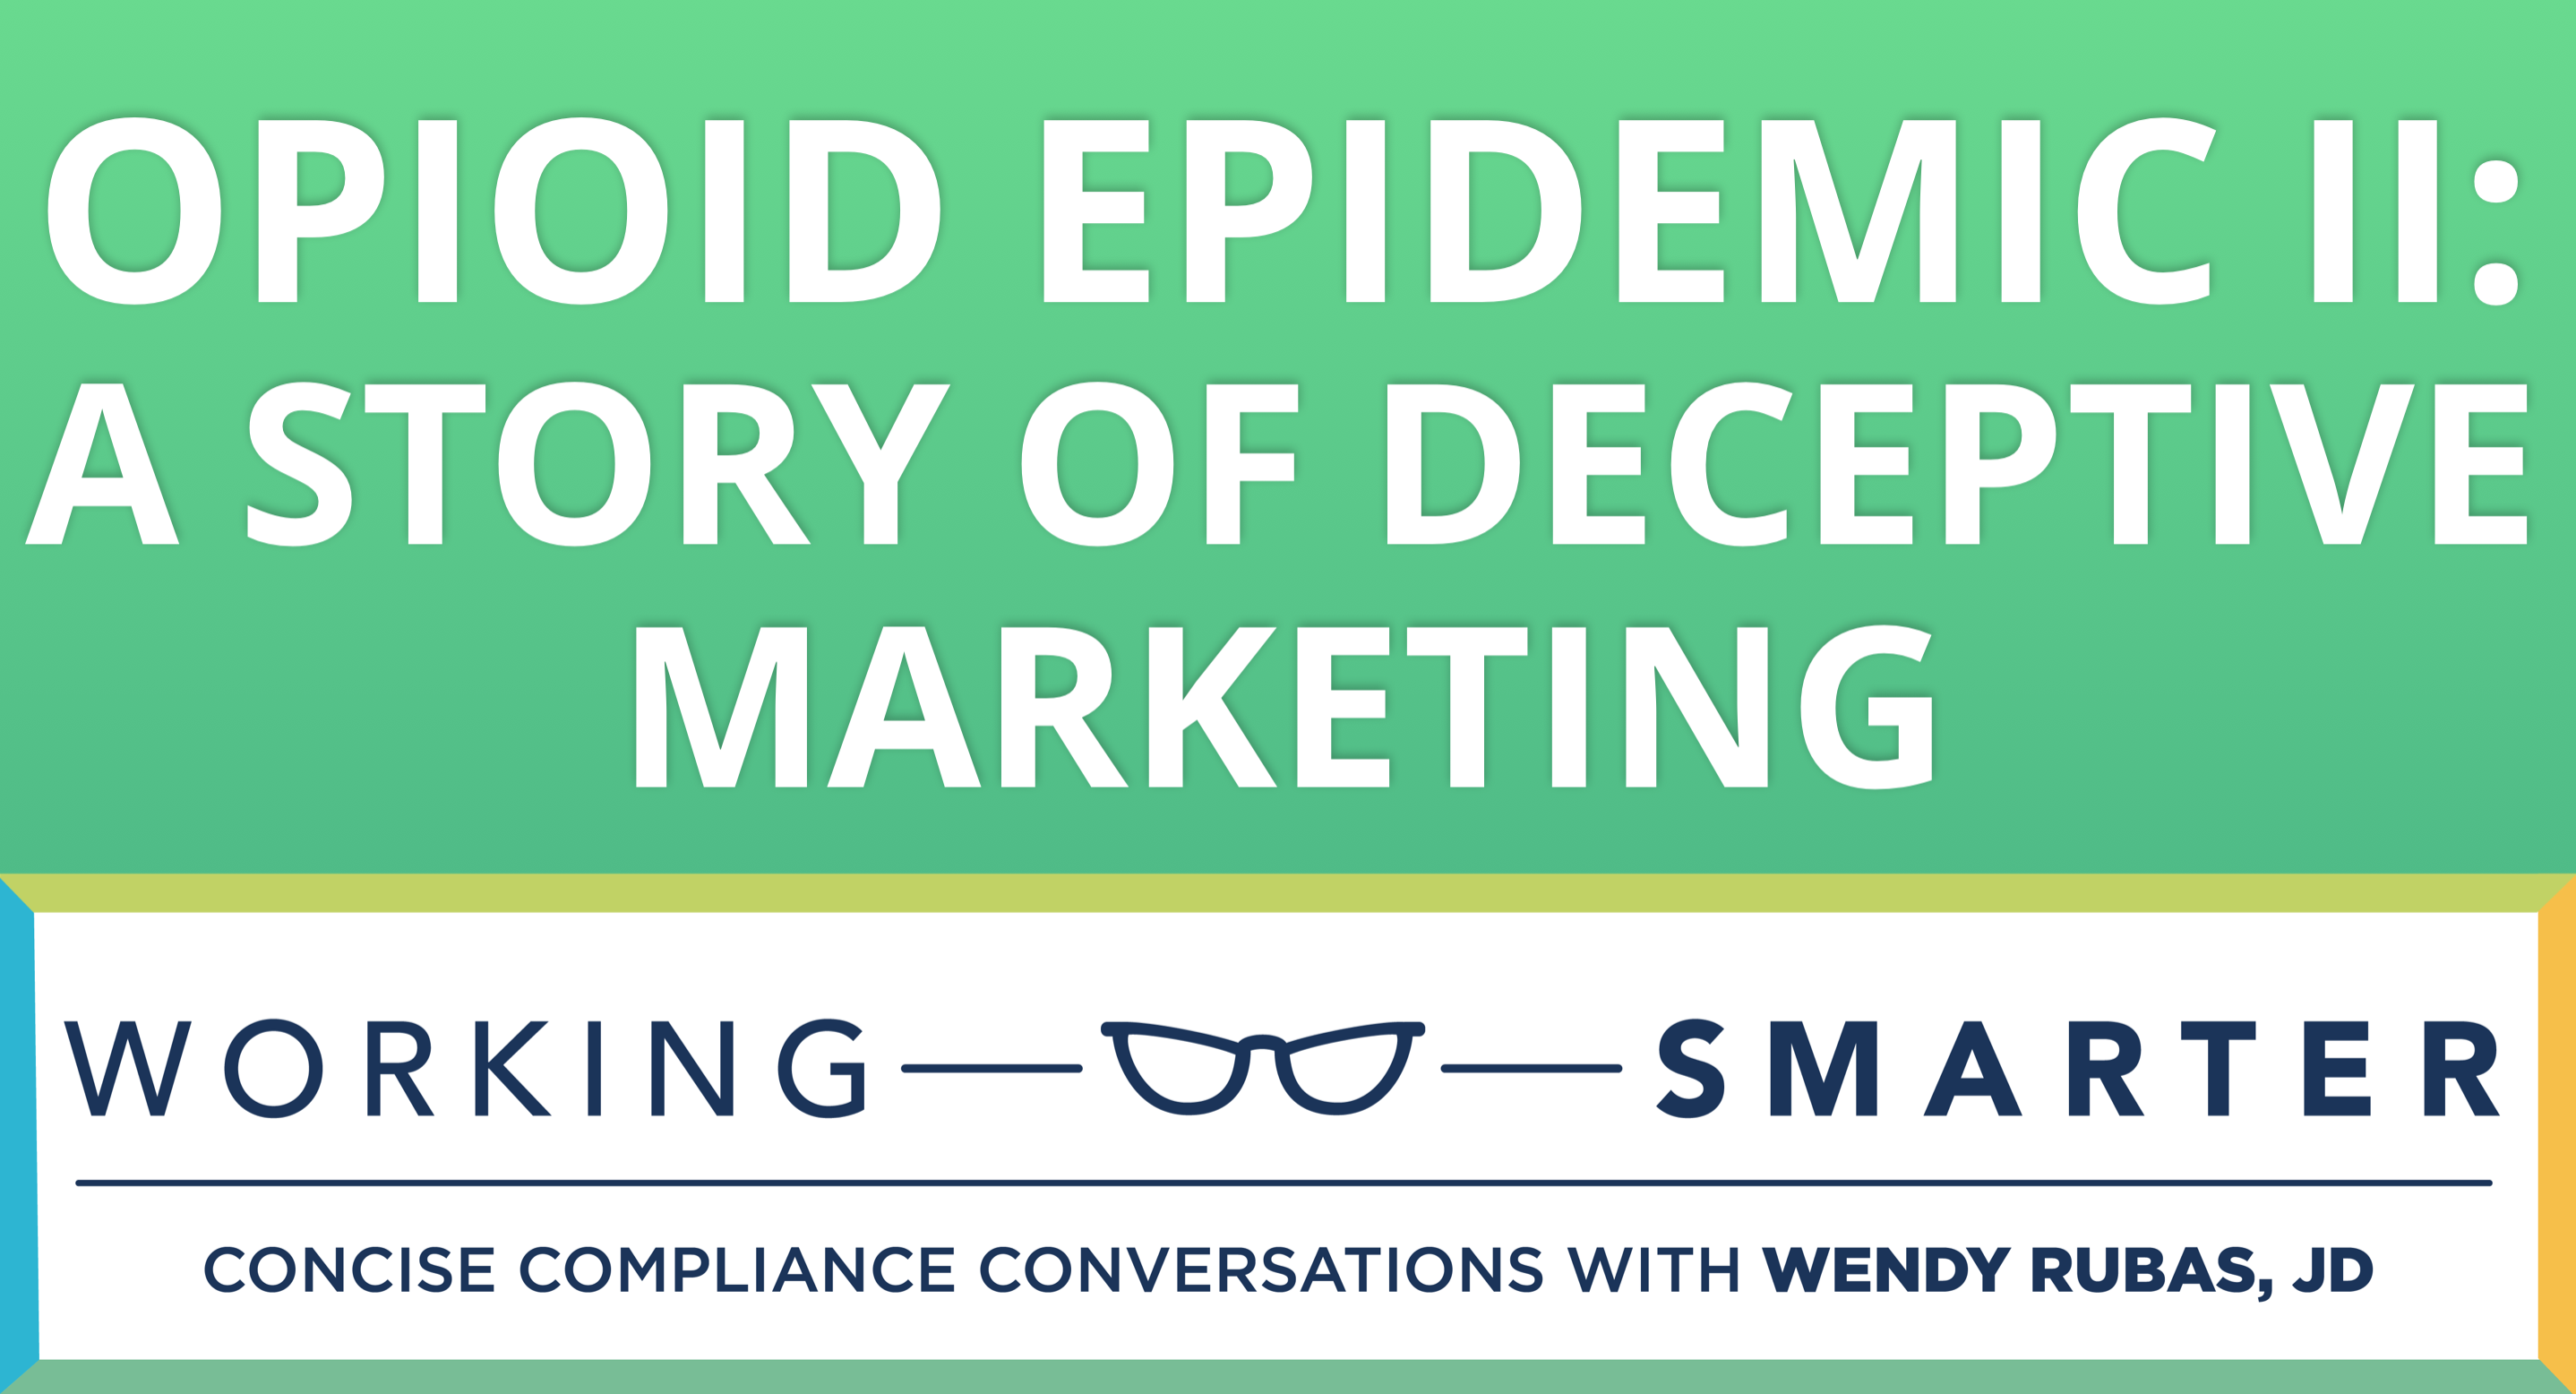 Working Smarter: The Role of Deceptive Marketing in the Opioid Epidemic